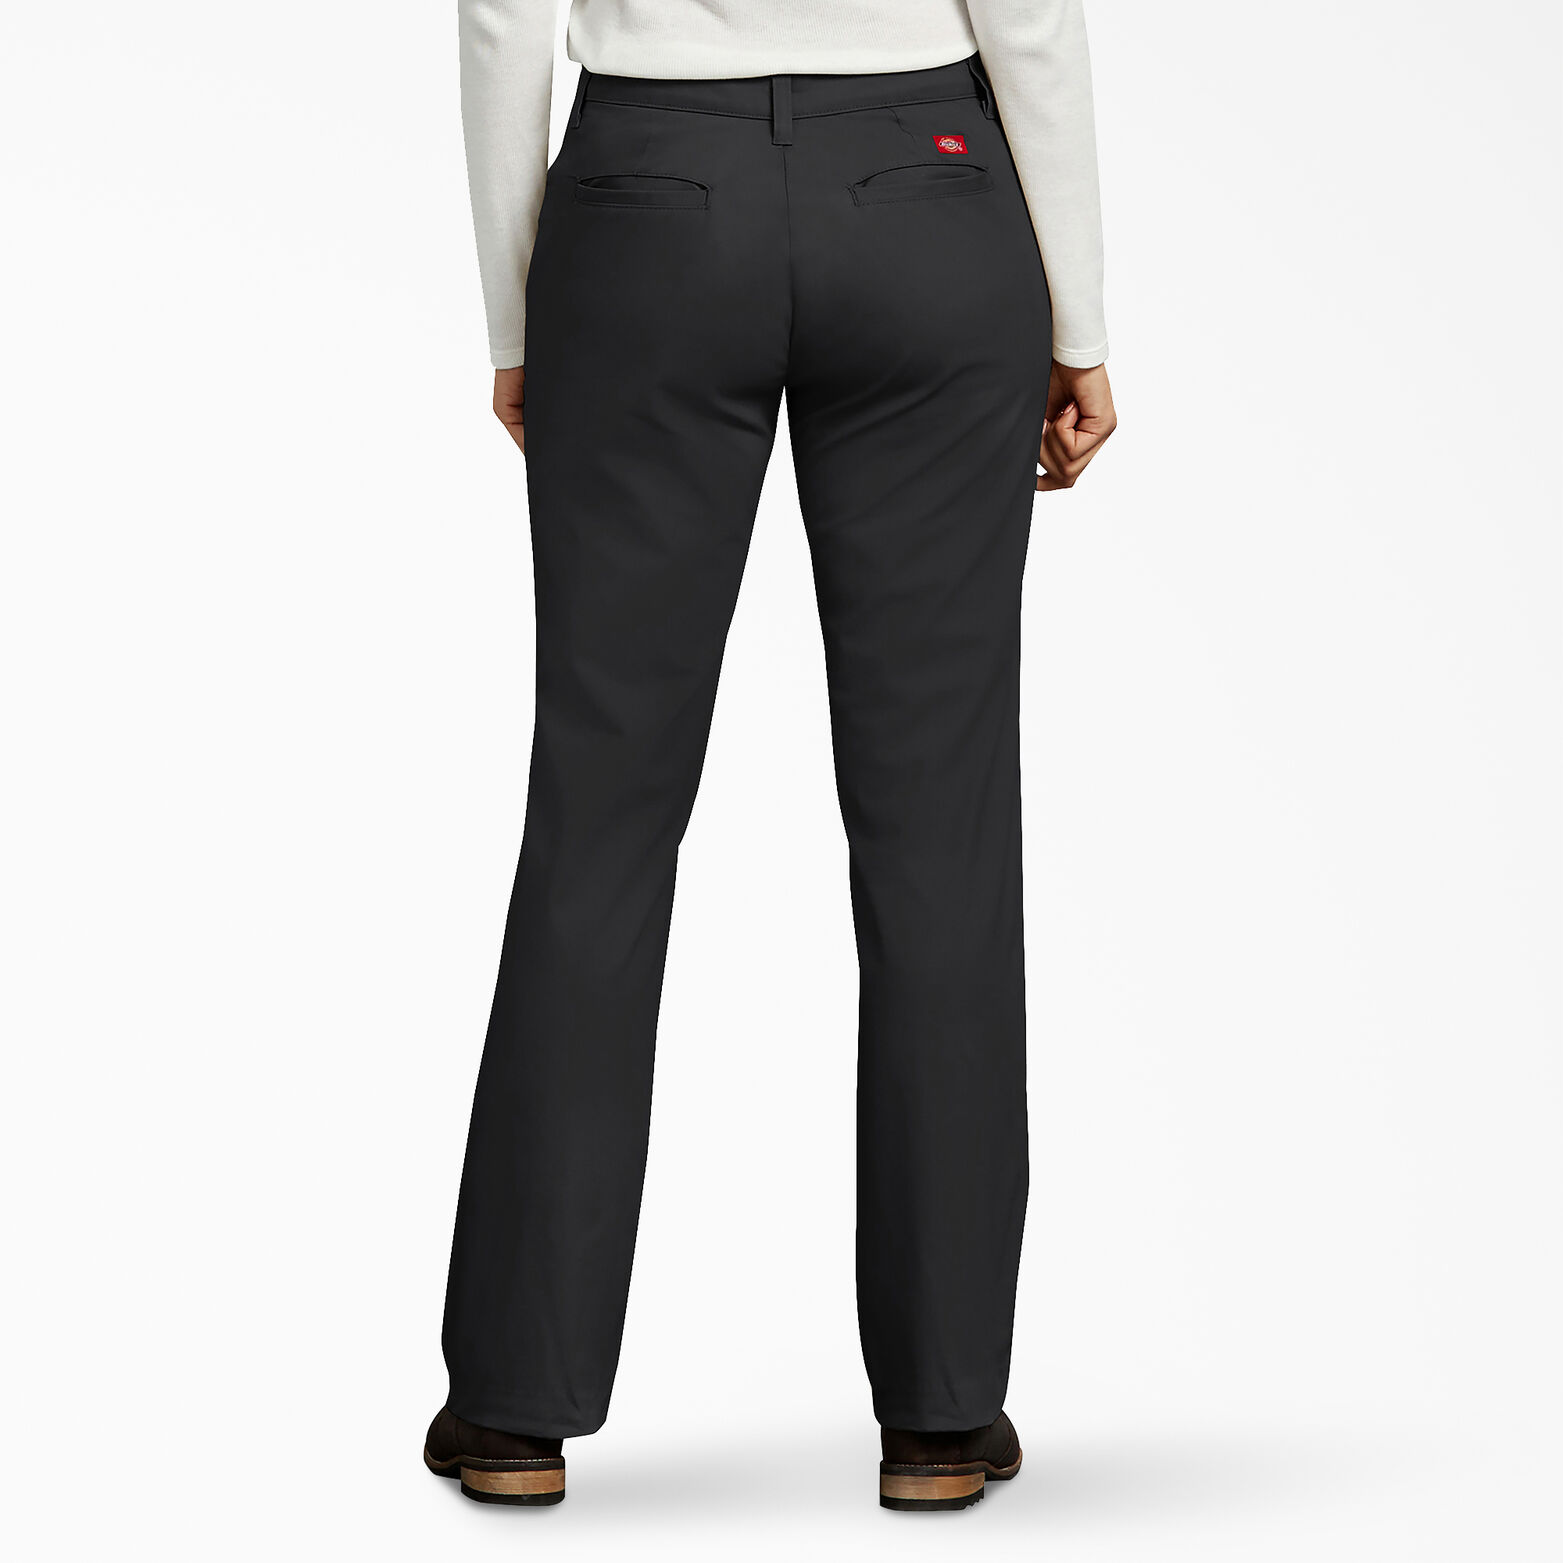 honor Cereza Influencia Women's Curvy Fit Straight Leg Stretch Twill Pants | Dickies